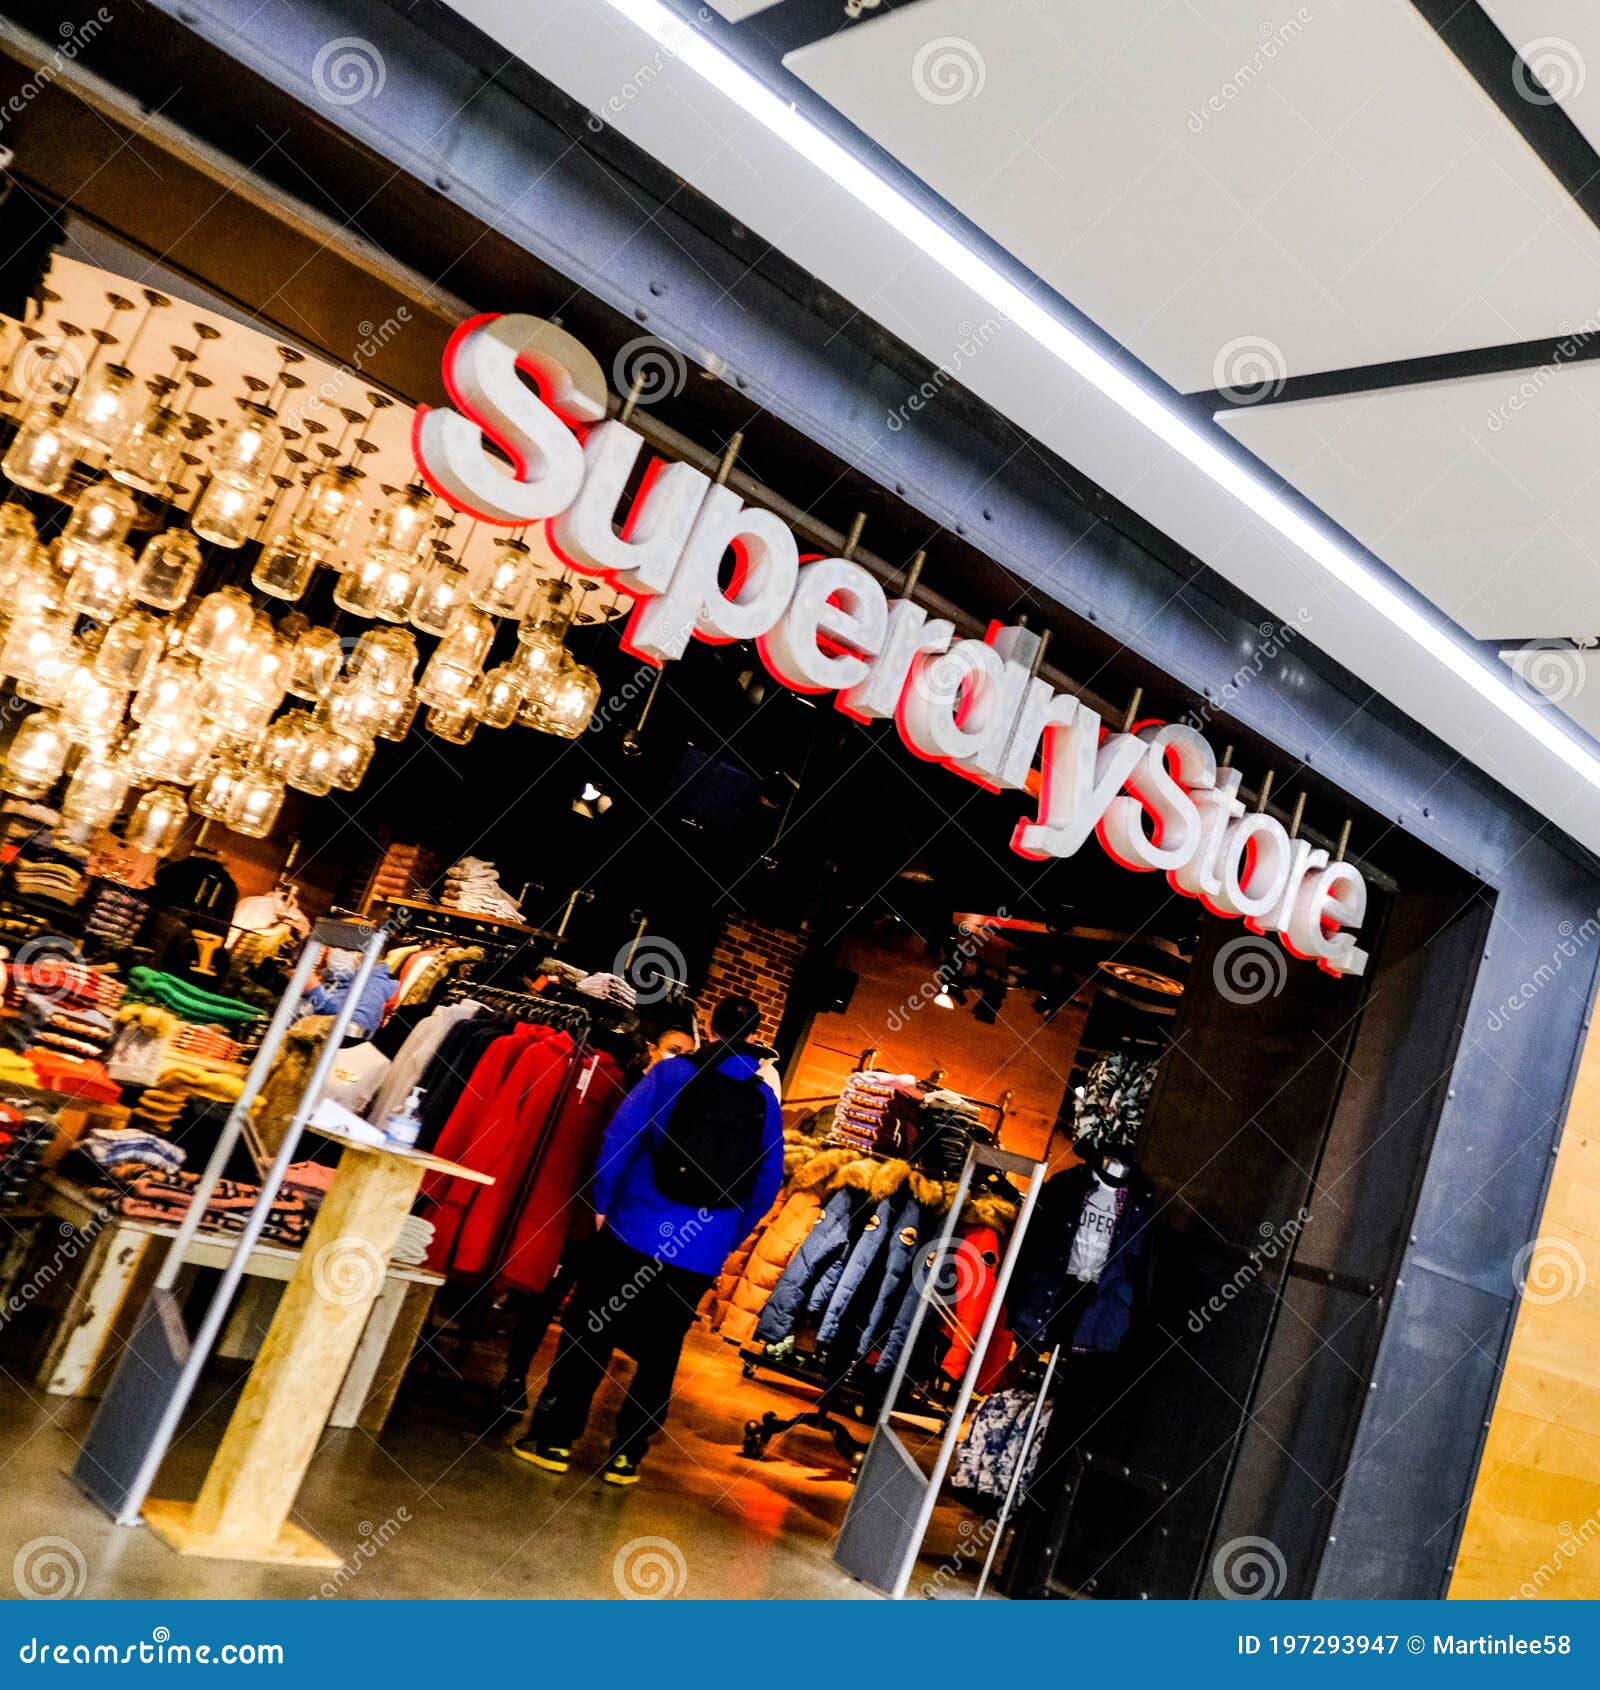 begaan Jaarlijks Voorman Superdry Retail Fashion Clothing Brand Shop Editorial Photography - Image  of front, colourful: 197293947